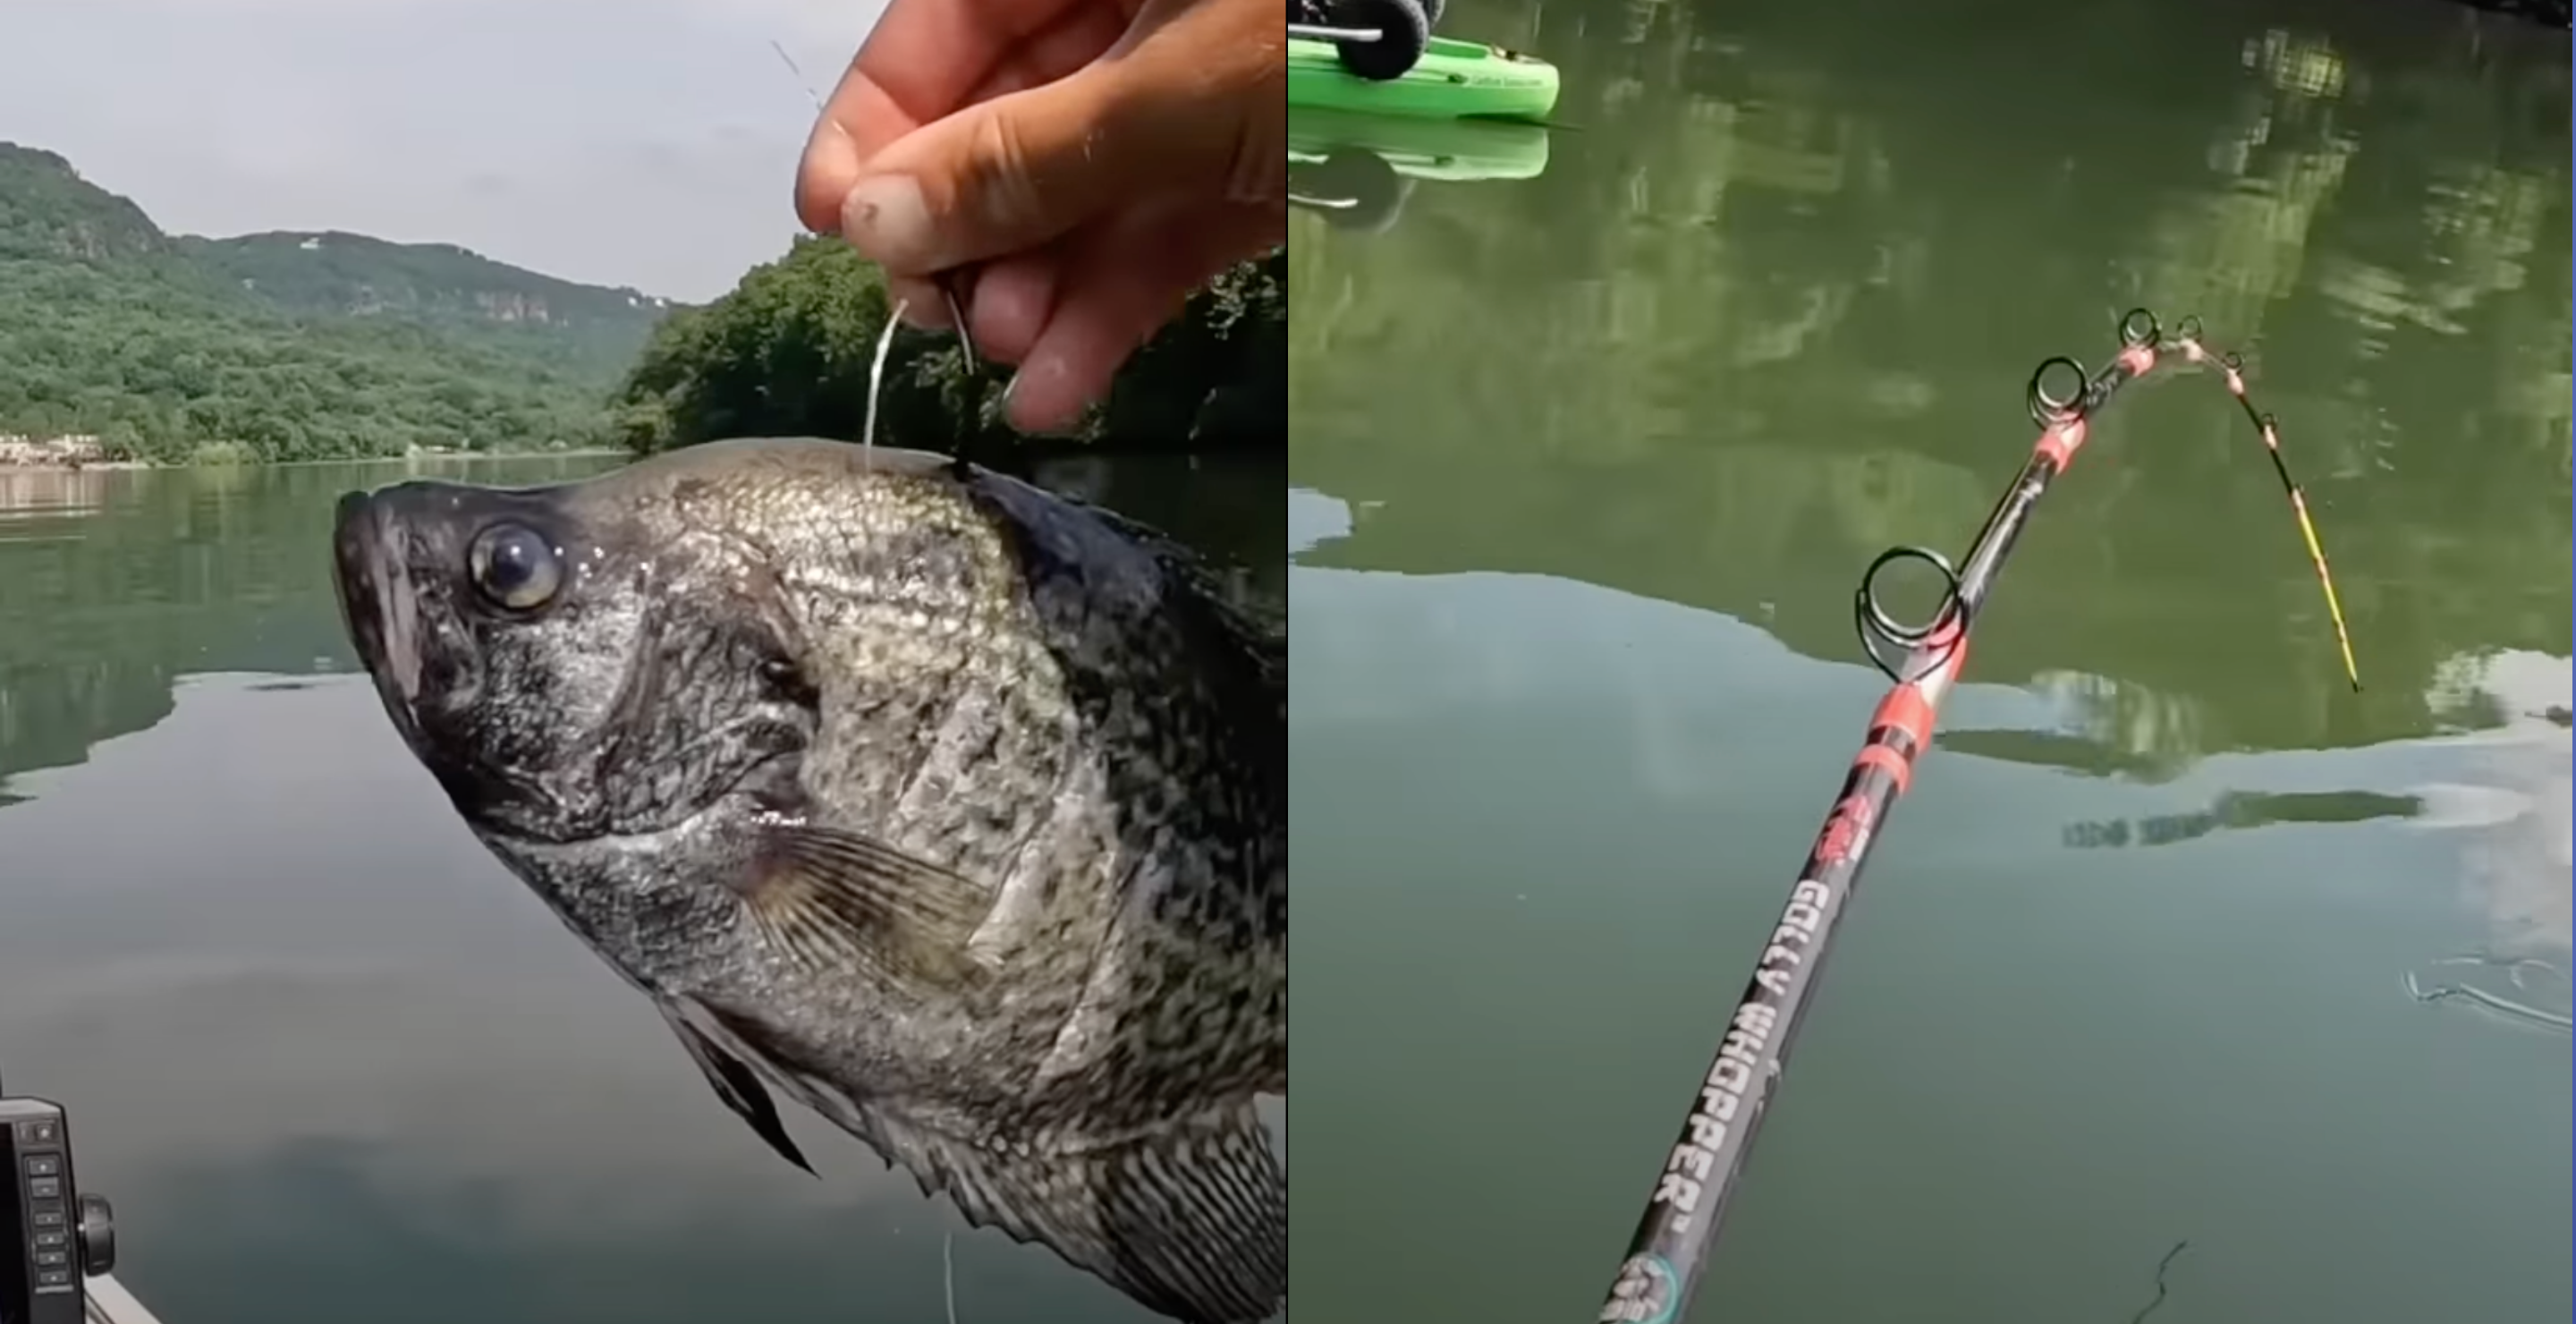 Angler Hooks Into Big Fish Using Dead Crappie as Bait